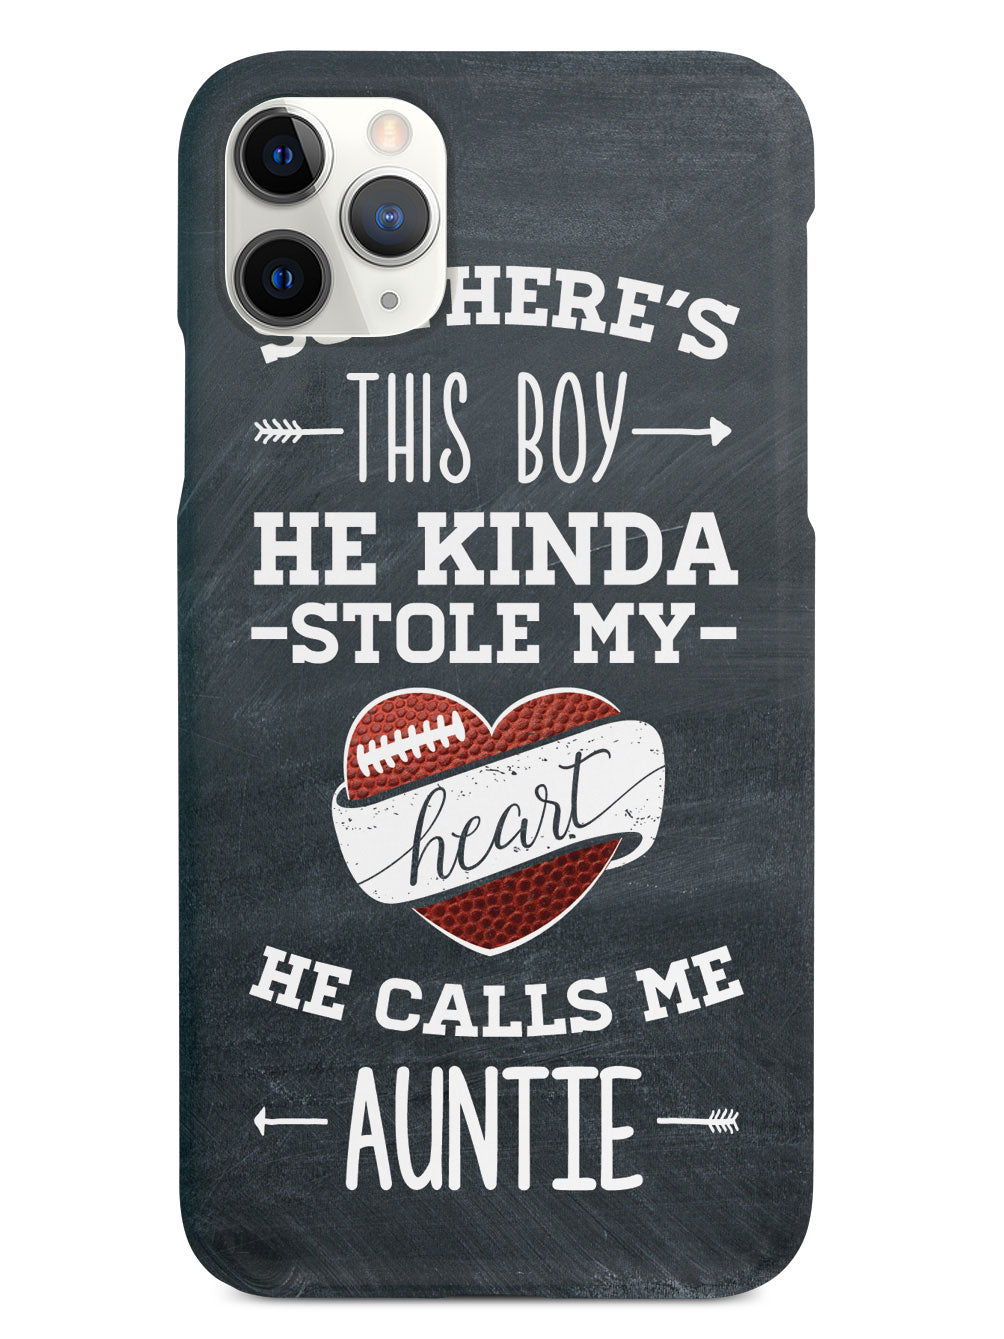 So there's this Boy - Football Player - Auntie Case